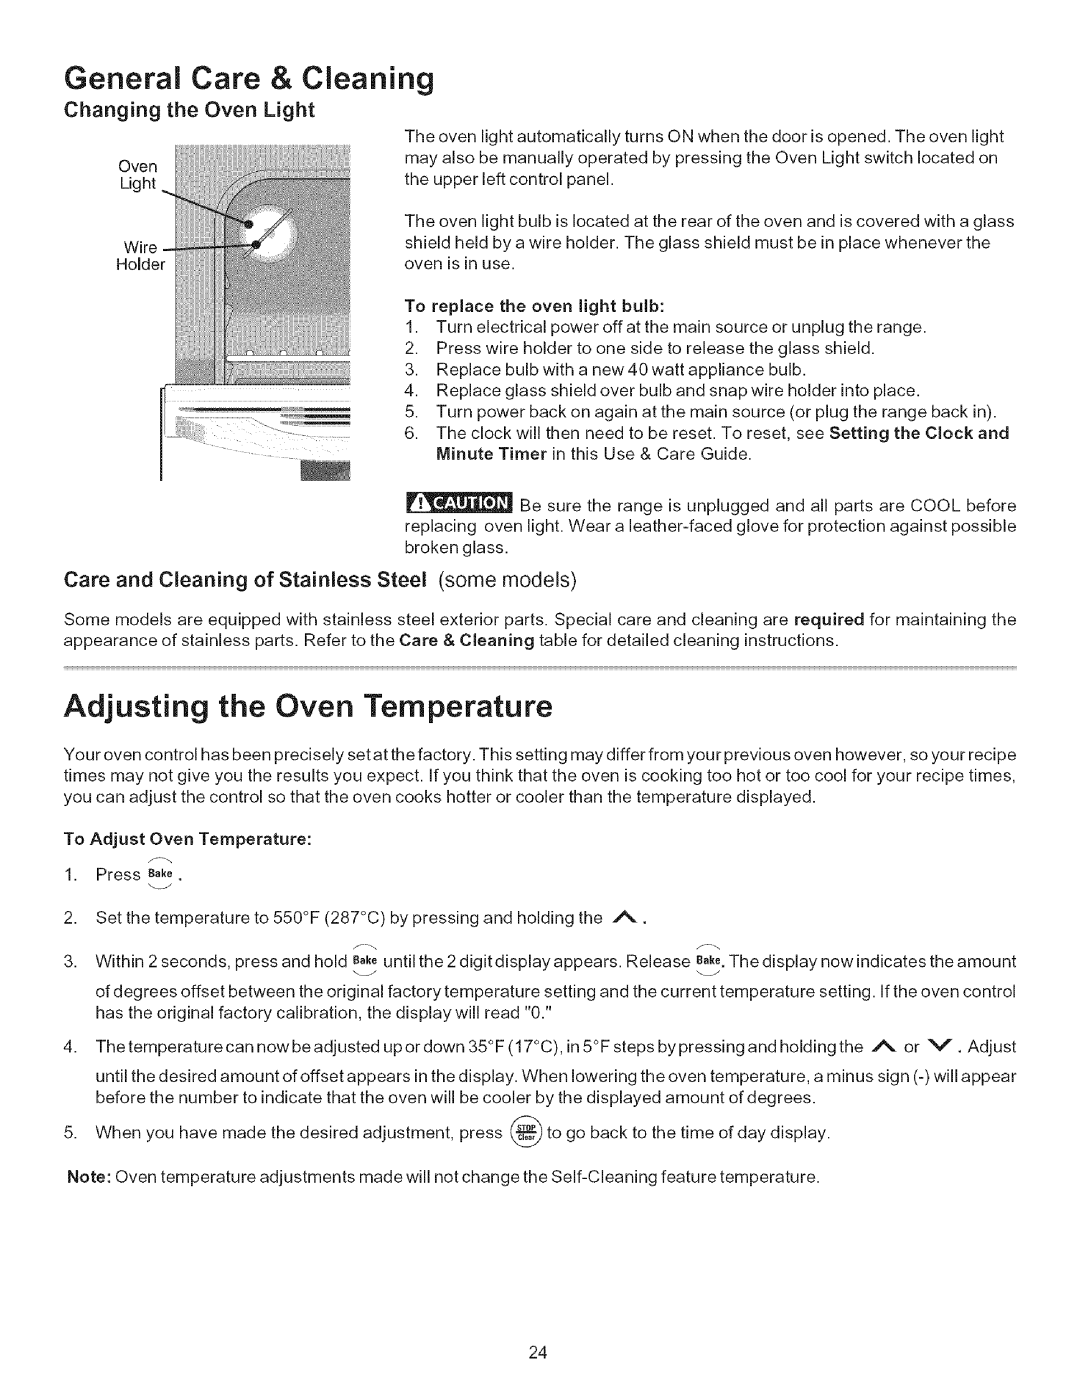 Kenmore 790.9434, 790.9613, 790.9612 manual Adjusting the Oven Temperature, General Care & Cleani, Changing the Oven Light 